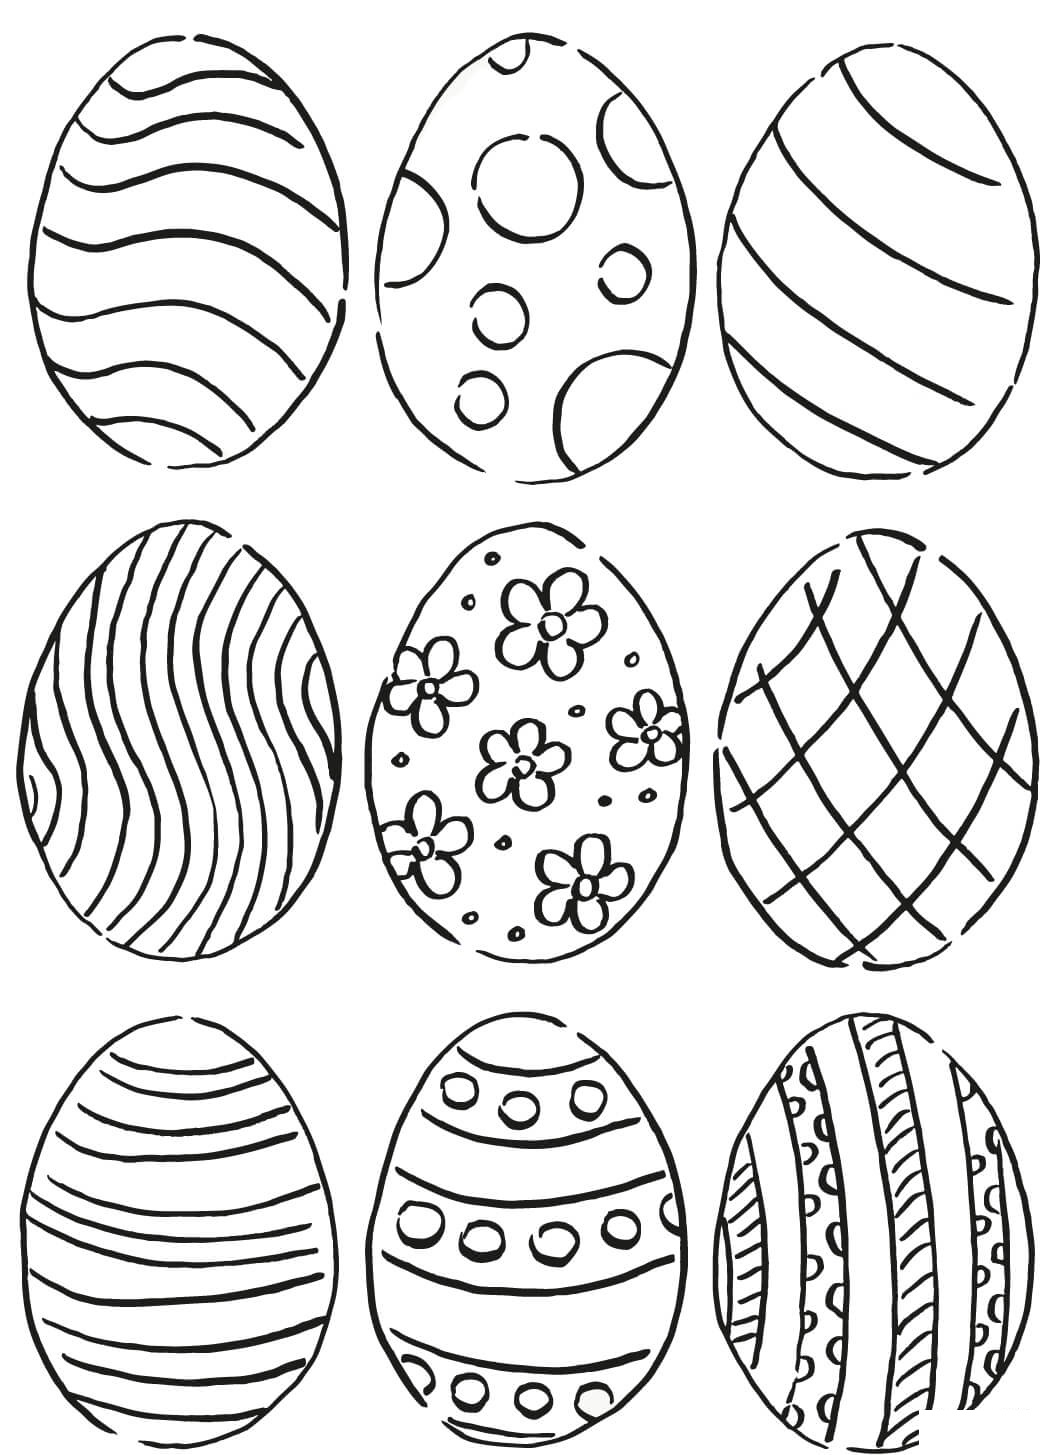 Easter Eggs Pattern Coloring Page